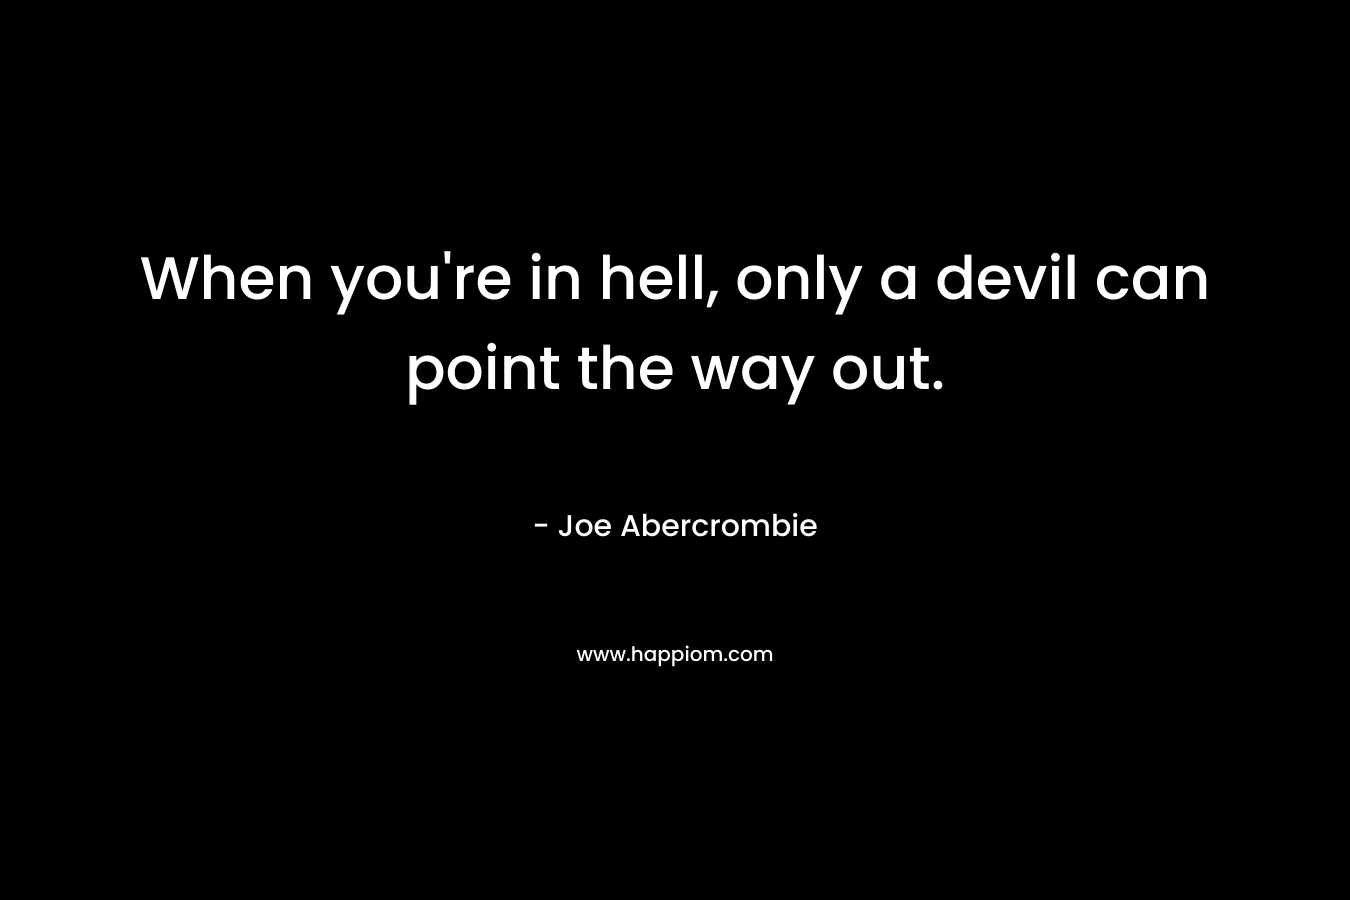 When you're in hell, only a devil can point the way out.